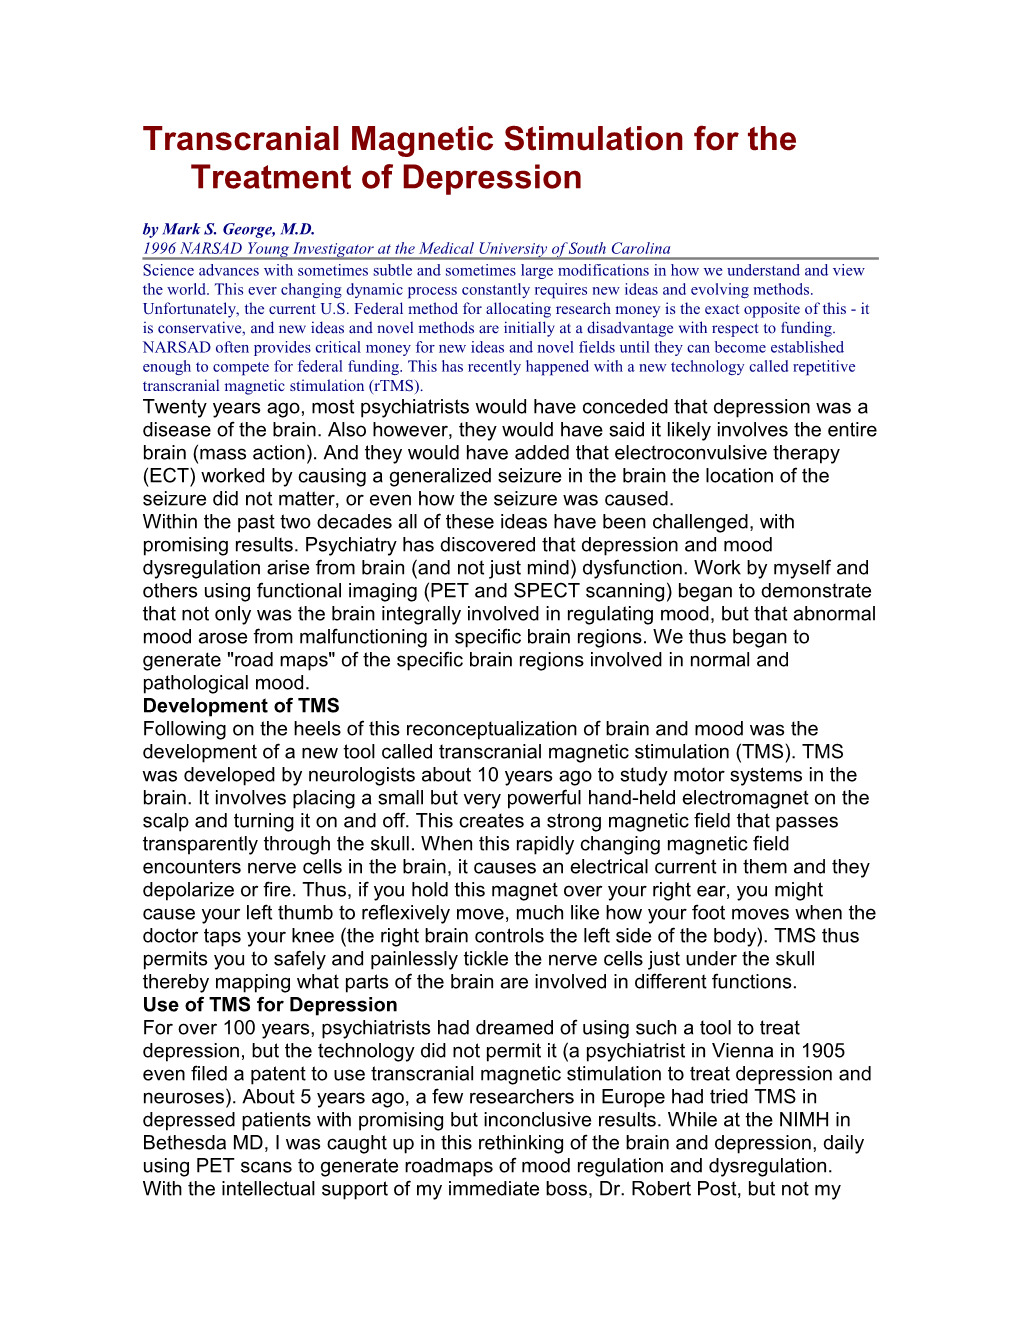 Transcranial Magnetic Stimulation for the Treatment of Depression